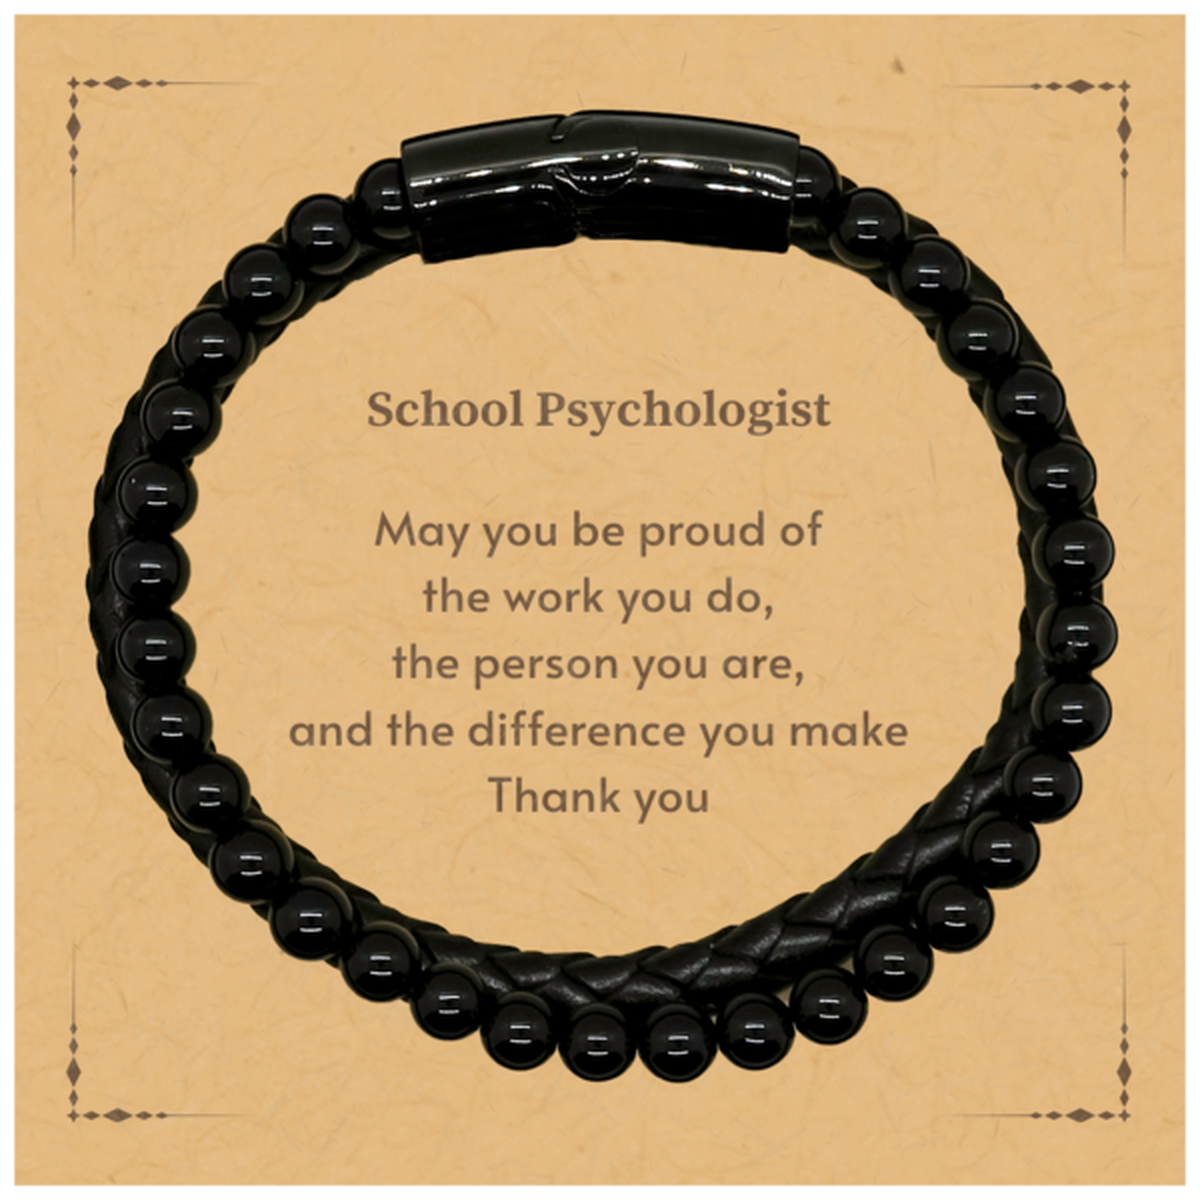 Heartwarming Stone Leather Bracelets Retirement Coworkers Gifts for School Psychologist, School Psychologist May You be proud of the work you do, the person you are Gifts for Boss Men Women Friends